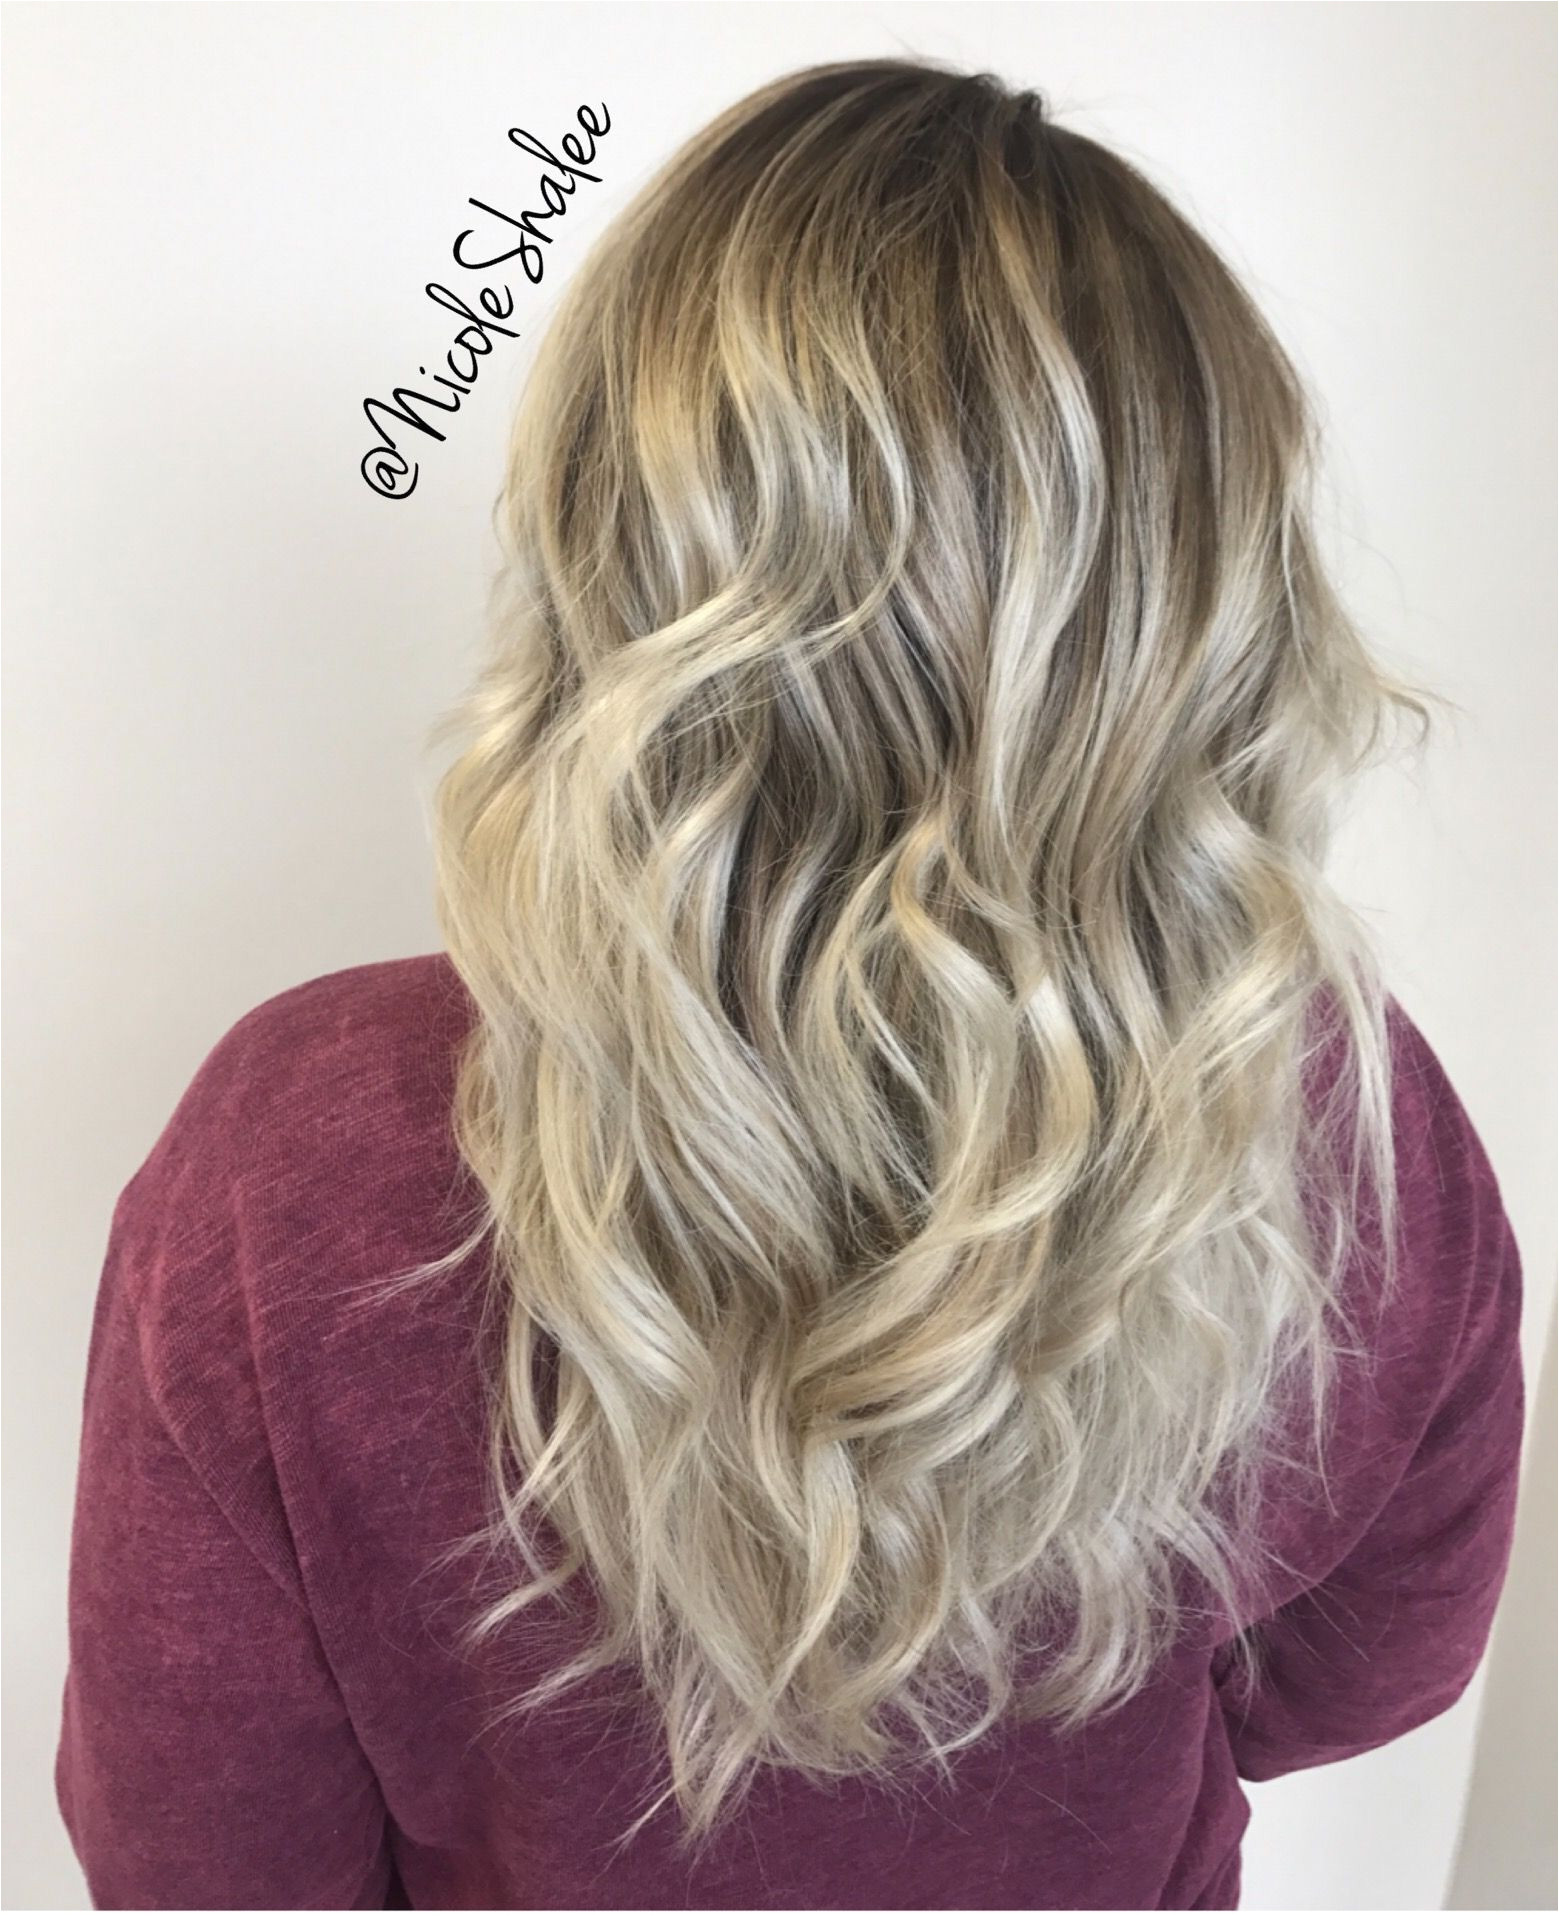 Shadow root smudge root blonde hair dark roots long hair curled